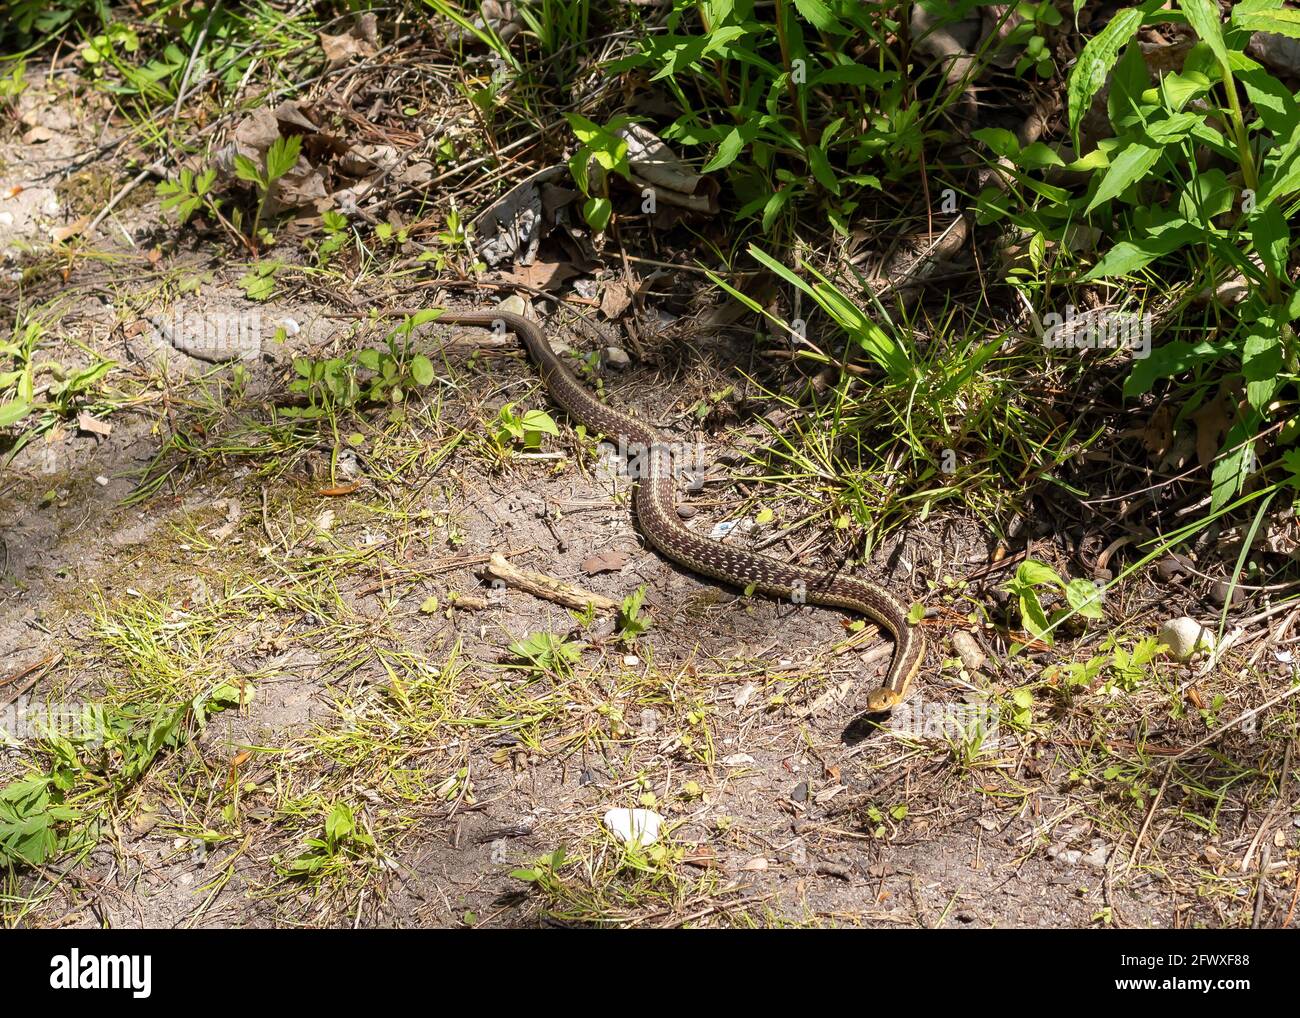 Eastern gartersnake - Thamnophis sirtalis sirtalis - slithering on the side of a trail path in Ontario, Canada. Stock Photo